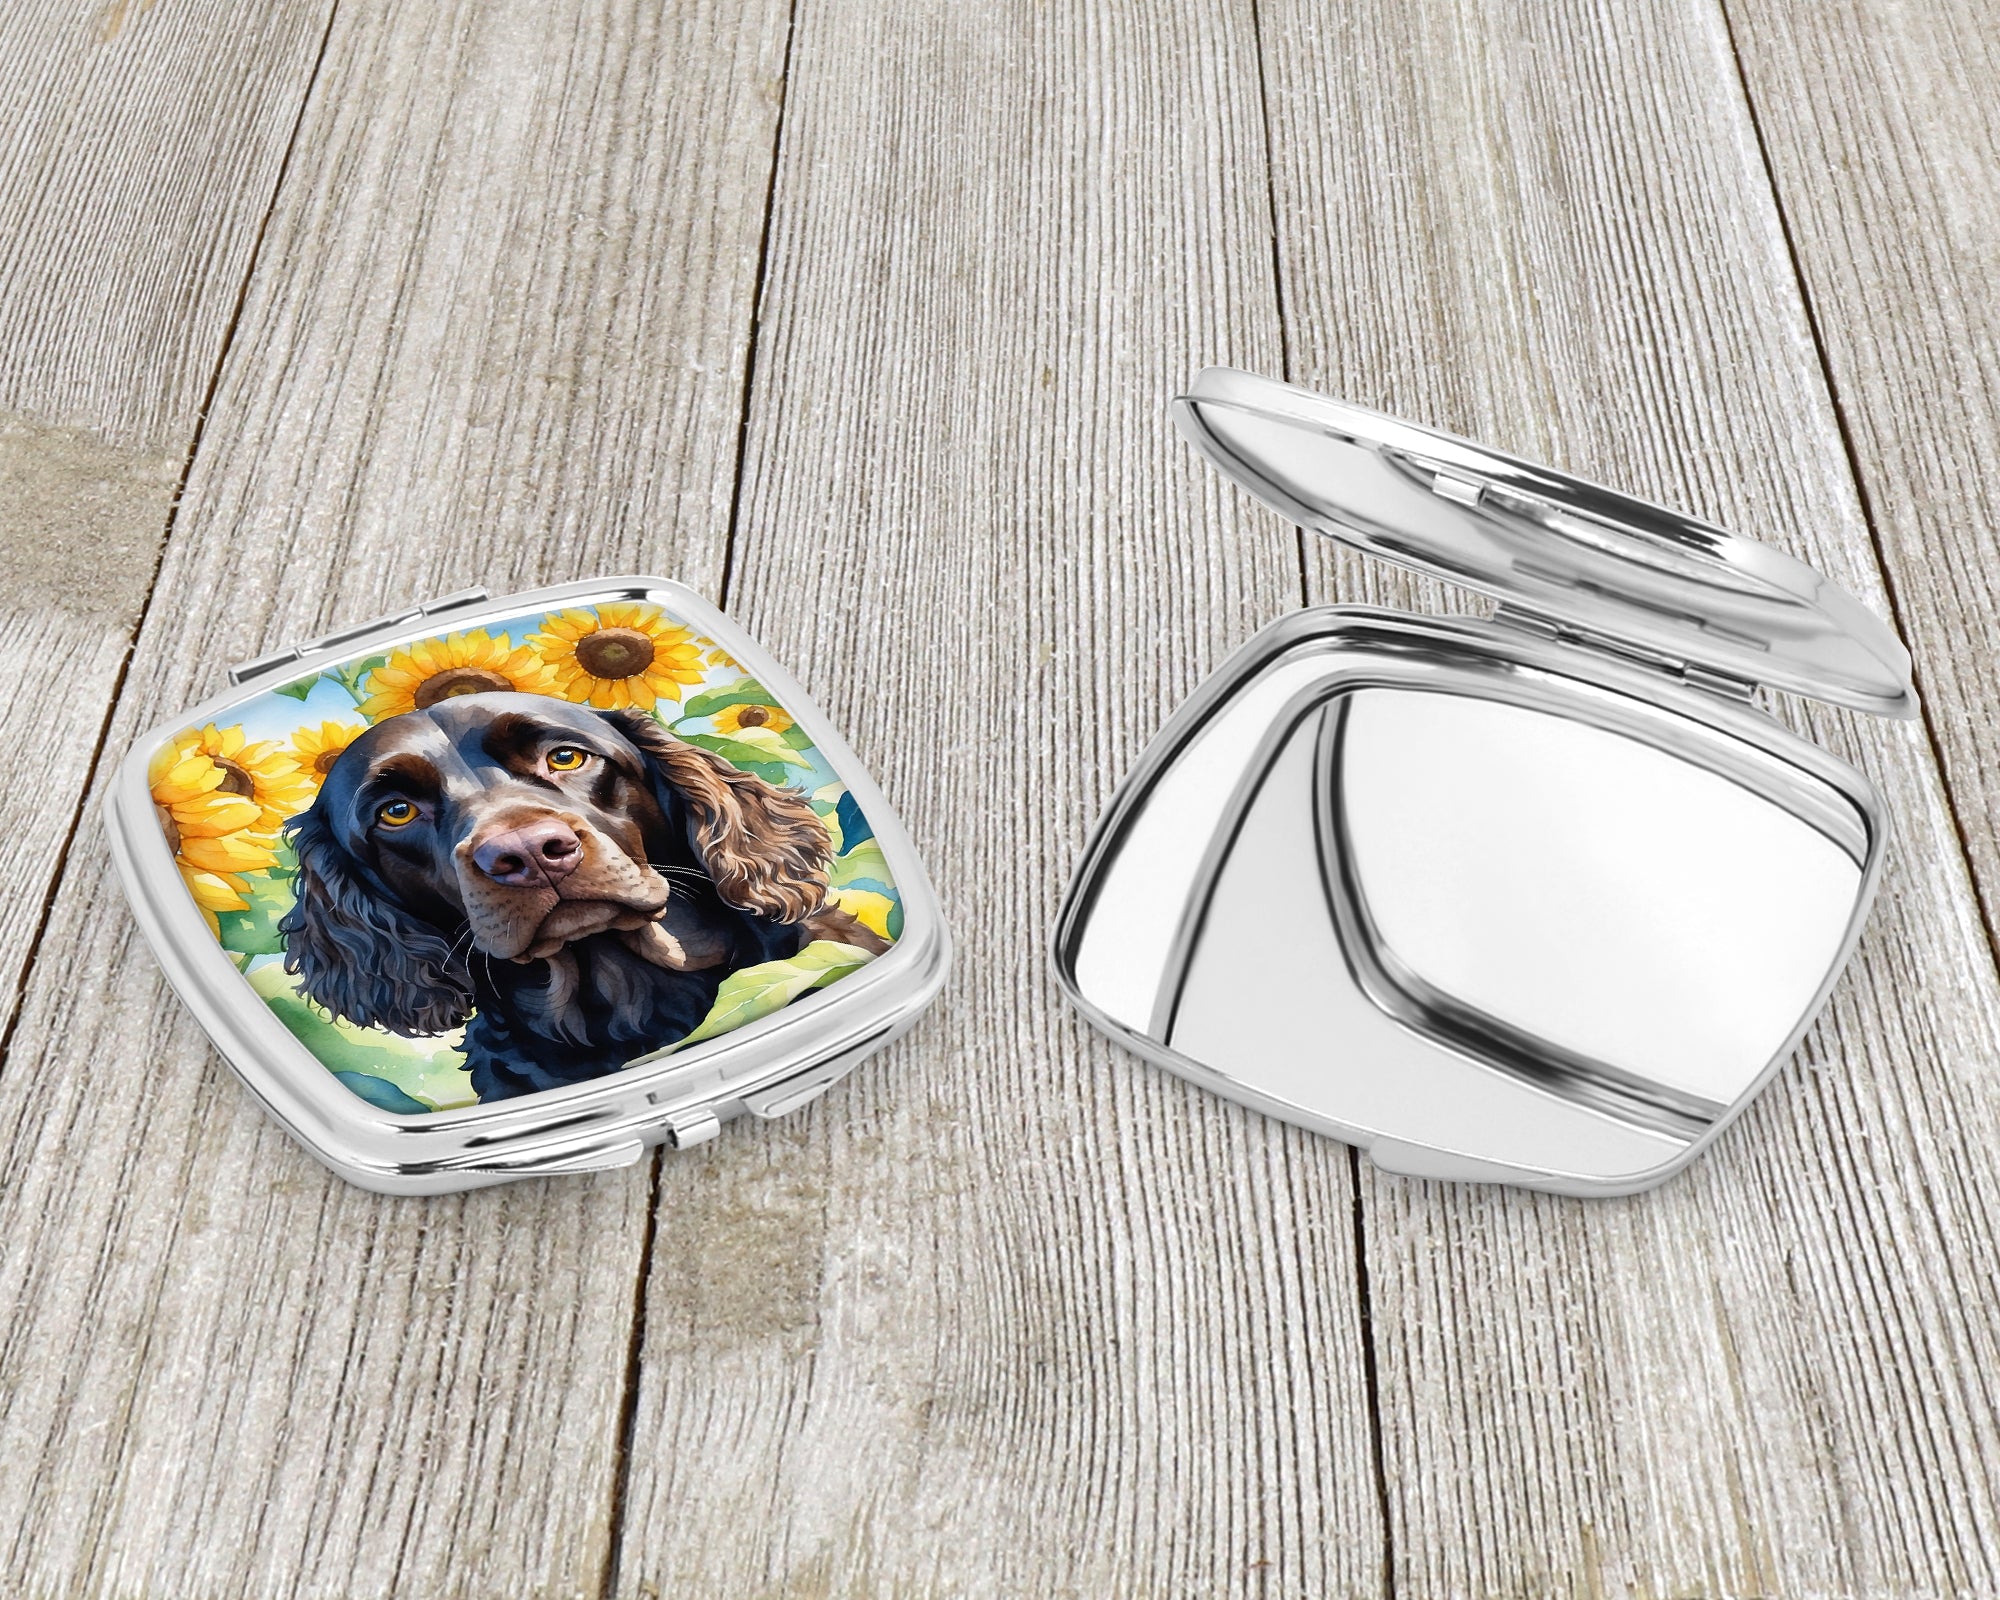 American Water Spaniel in Sunflowers Compact Mirror